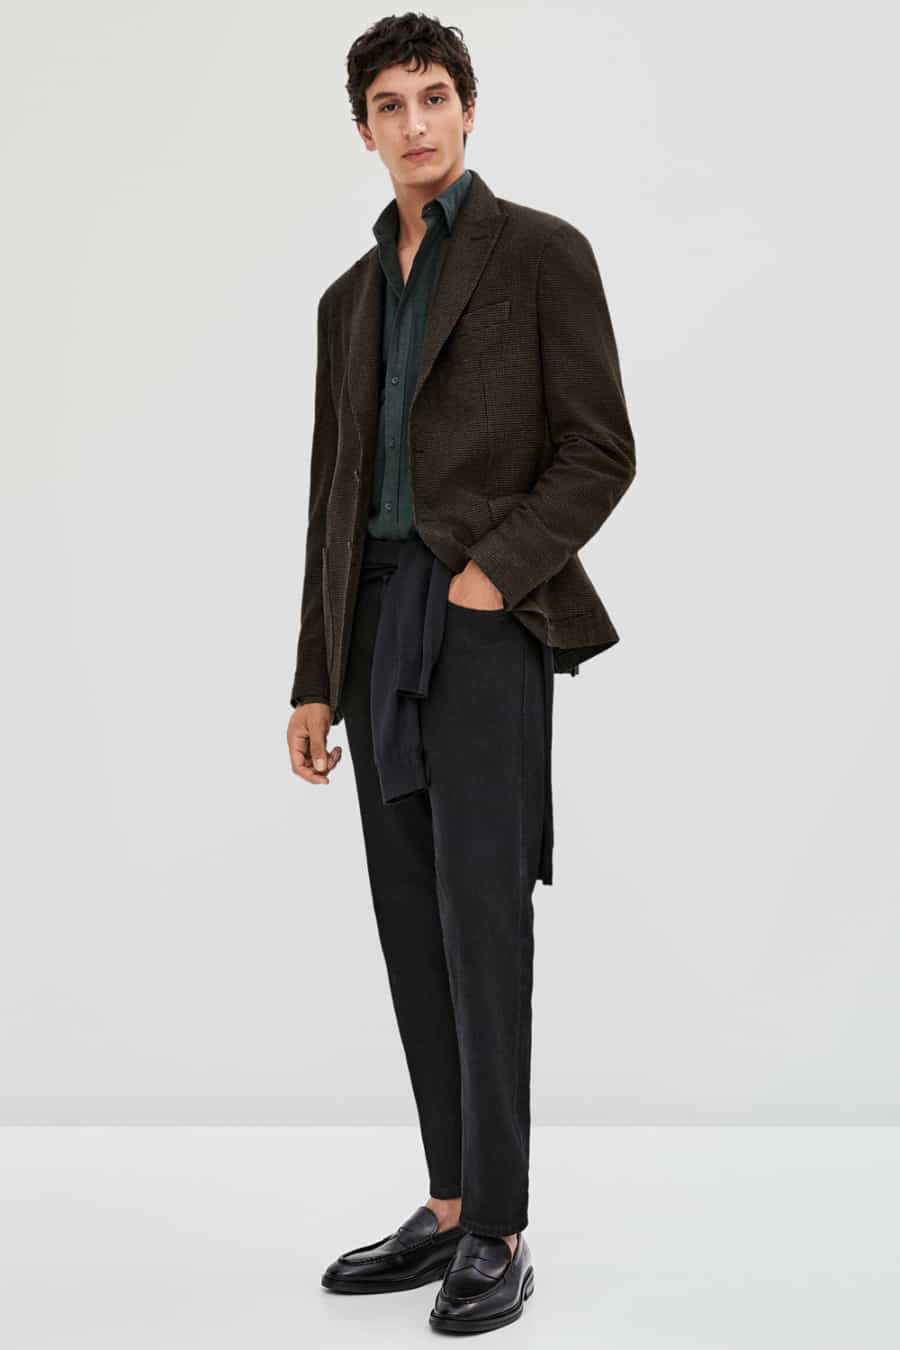 Men's black jeans, green shirt, brown blazer and loafers outfit